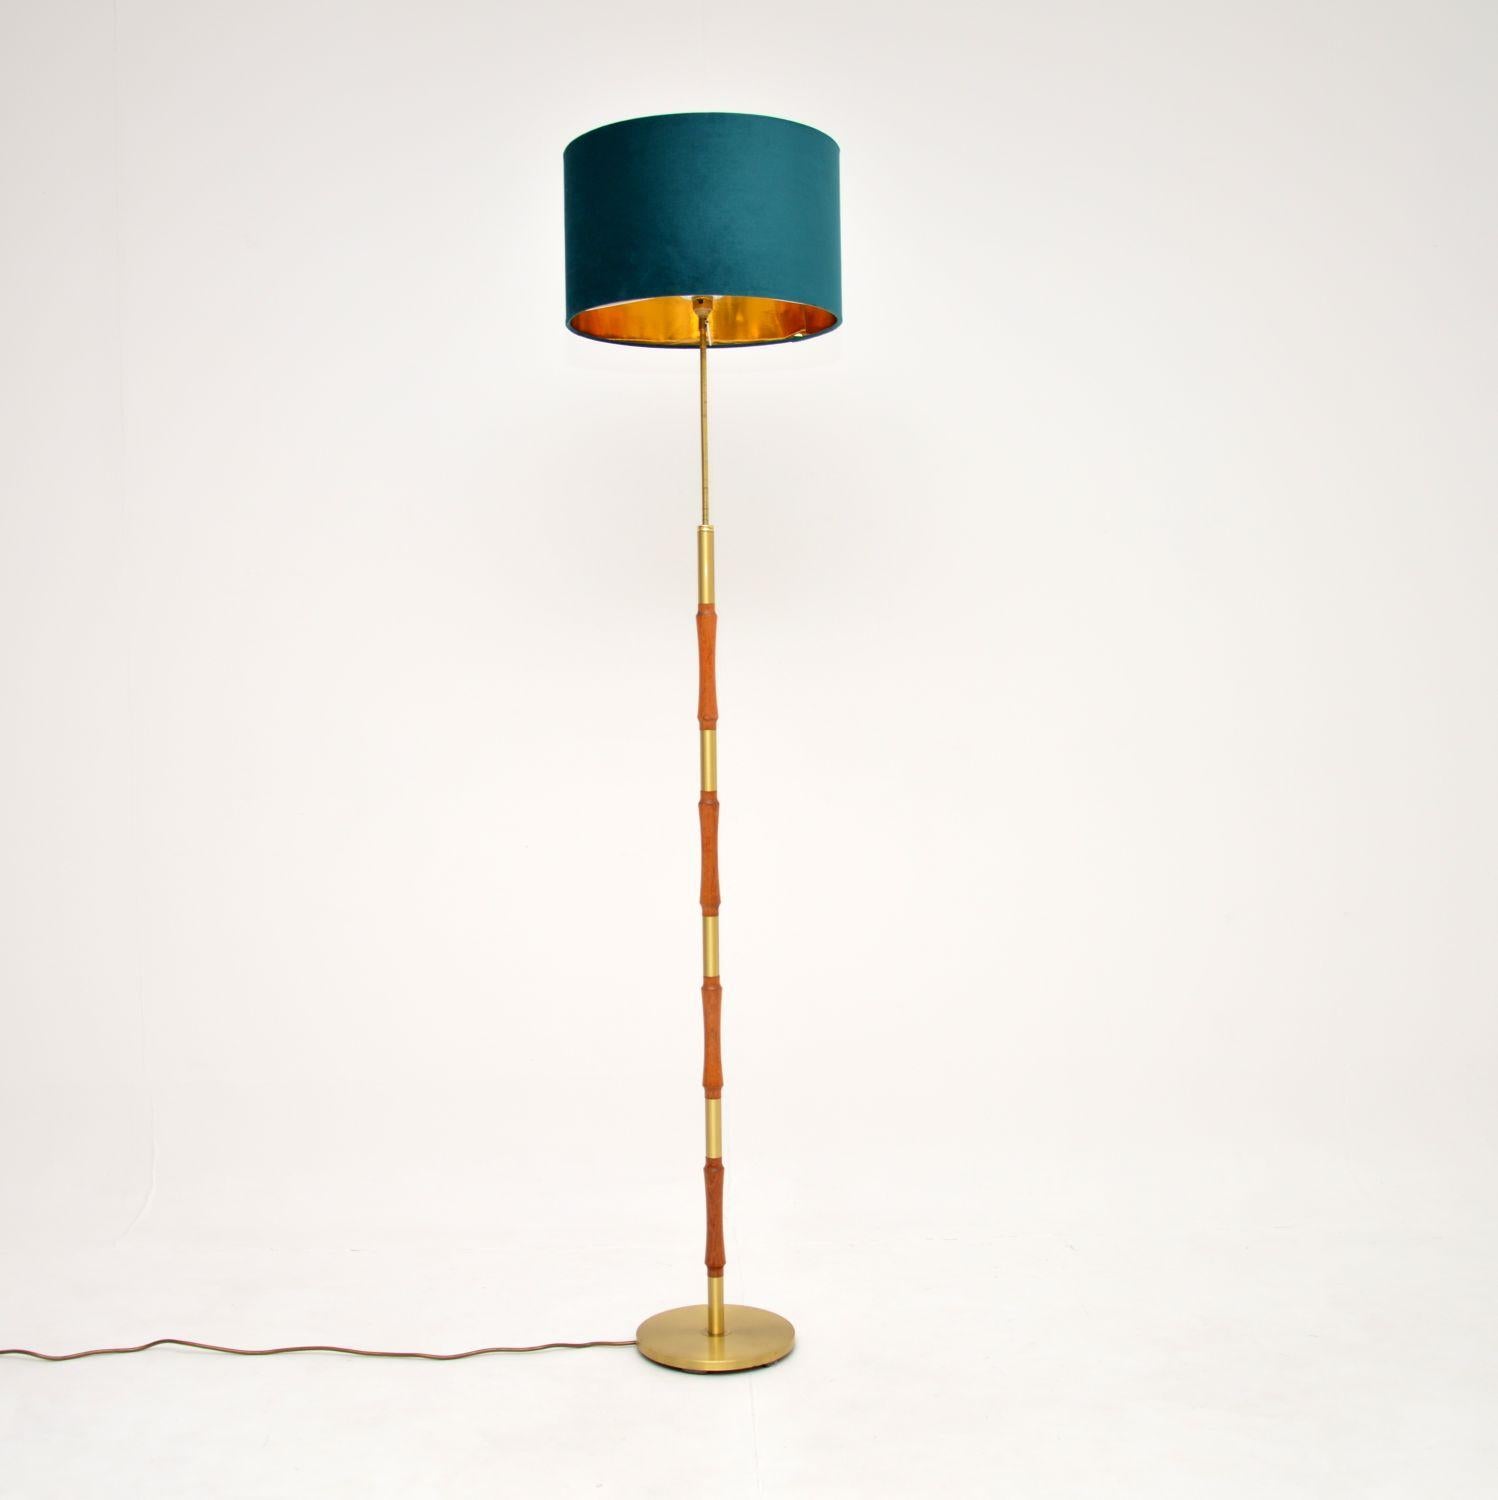 A gorgeous vintage rise and fall floor lamp in solid teak and brass. This was made in England, it dates from the 1960’s.

The quality is fantastic, the brass stand is adjustable so the shade can be raised and lowered.

We have had the teak wood